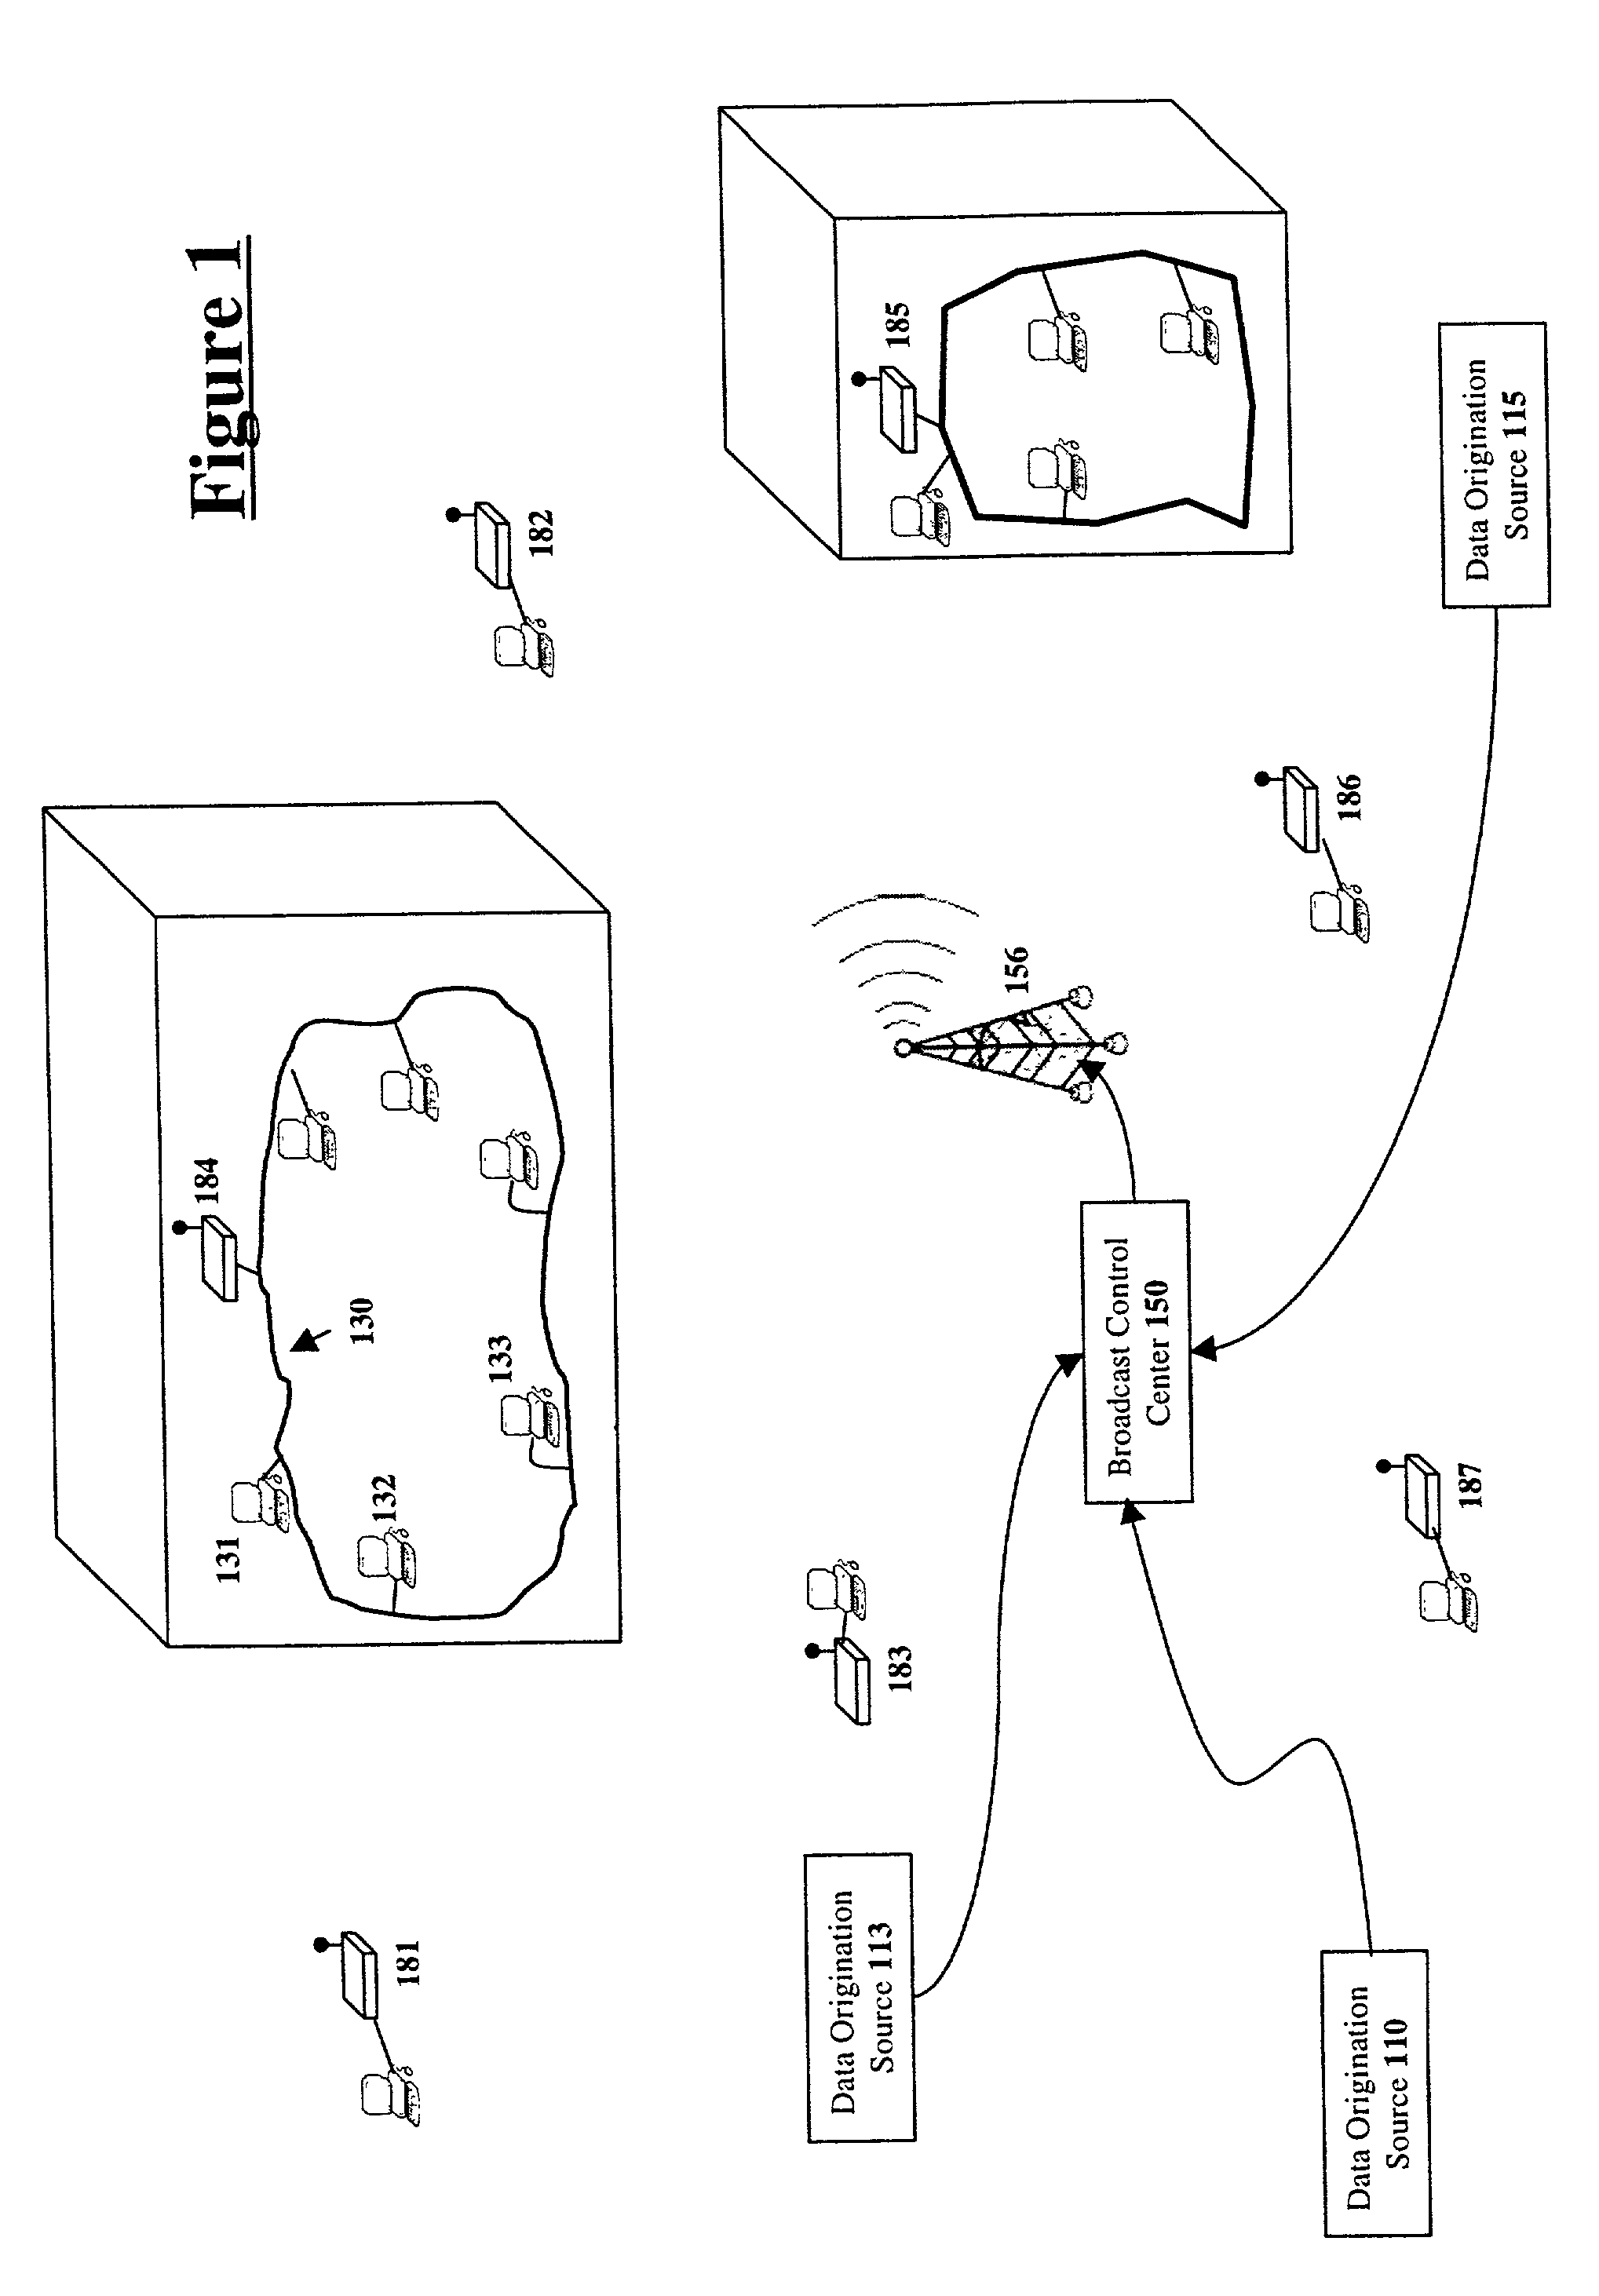 Methods of operating a data broadcast service